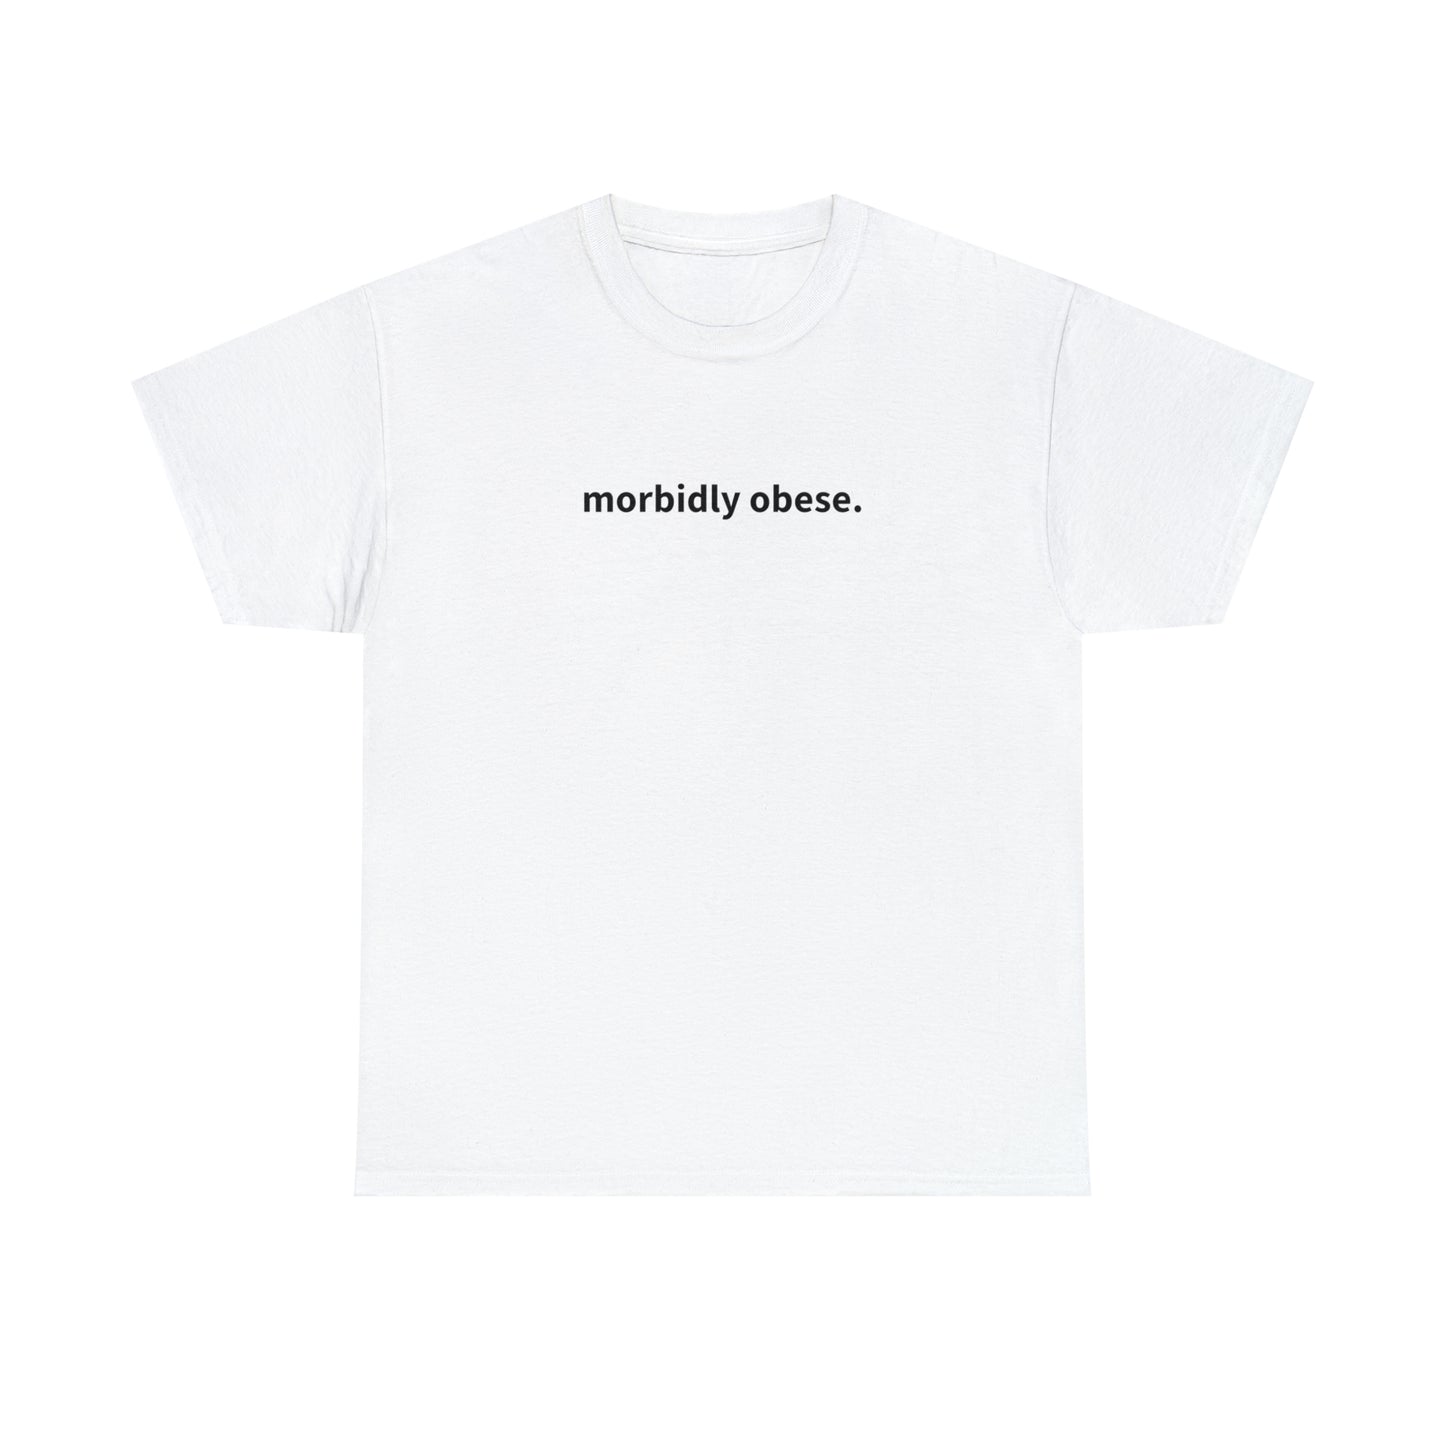 "morbidly obese" T-Shirt!